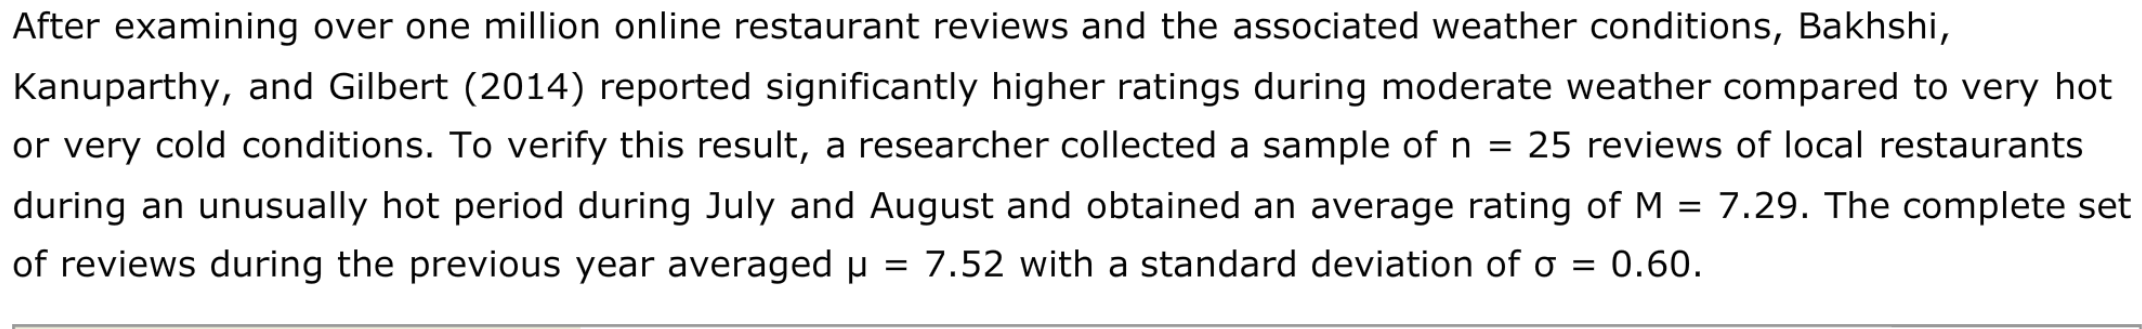 After examining over one million online restaurant reviews and the associated weather conditions, Bakhshi,
Kanuparthy, and Gilbert (2014) reported significantly higher ratings during moderate weather compared to very hot
or very cold conditions. To verify this result, a researcher collected a sample of n =
25 reviews of local restaurants
during an unusually hot period during July and August and obtained an average rating of M = 7.29. The complete set
of reviews during the previous year averaged µ = 7.52 with a standard deviation of o = 0.60.
